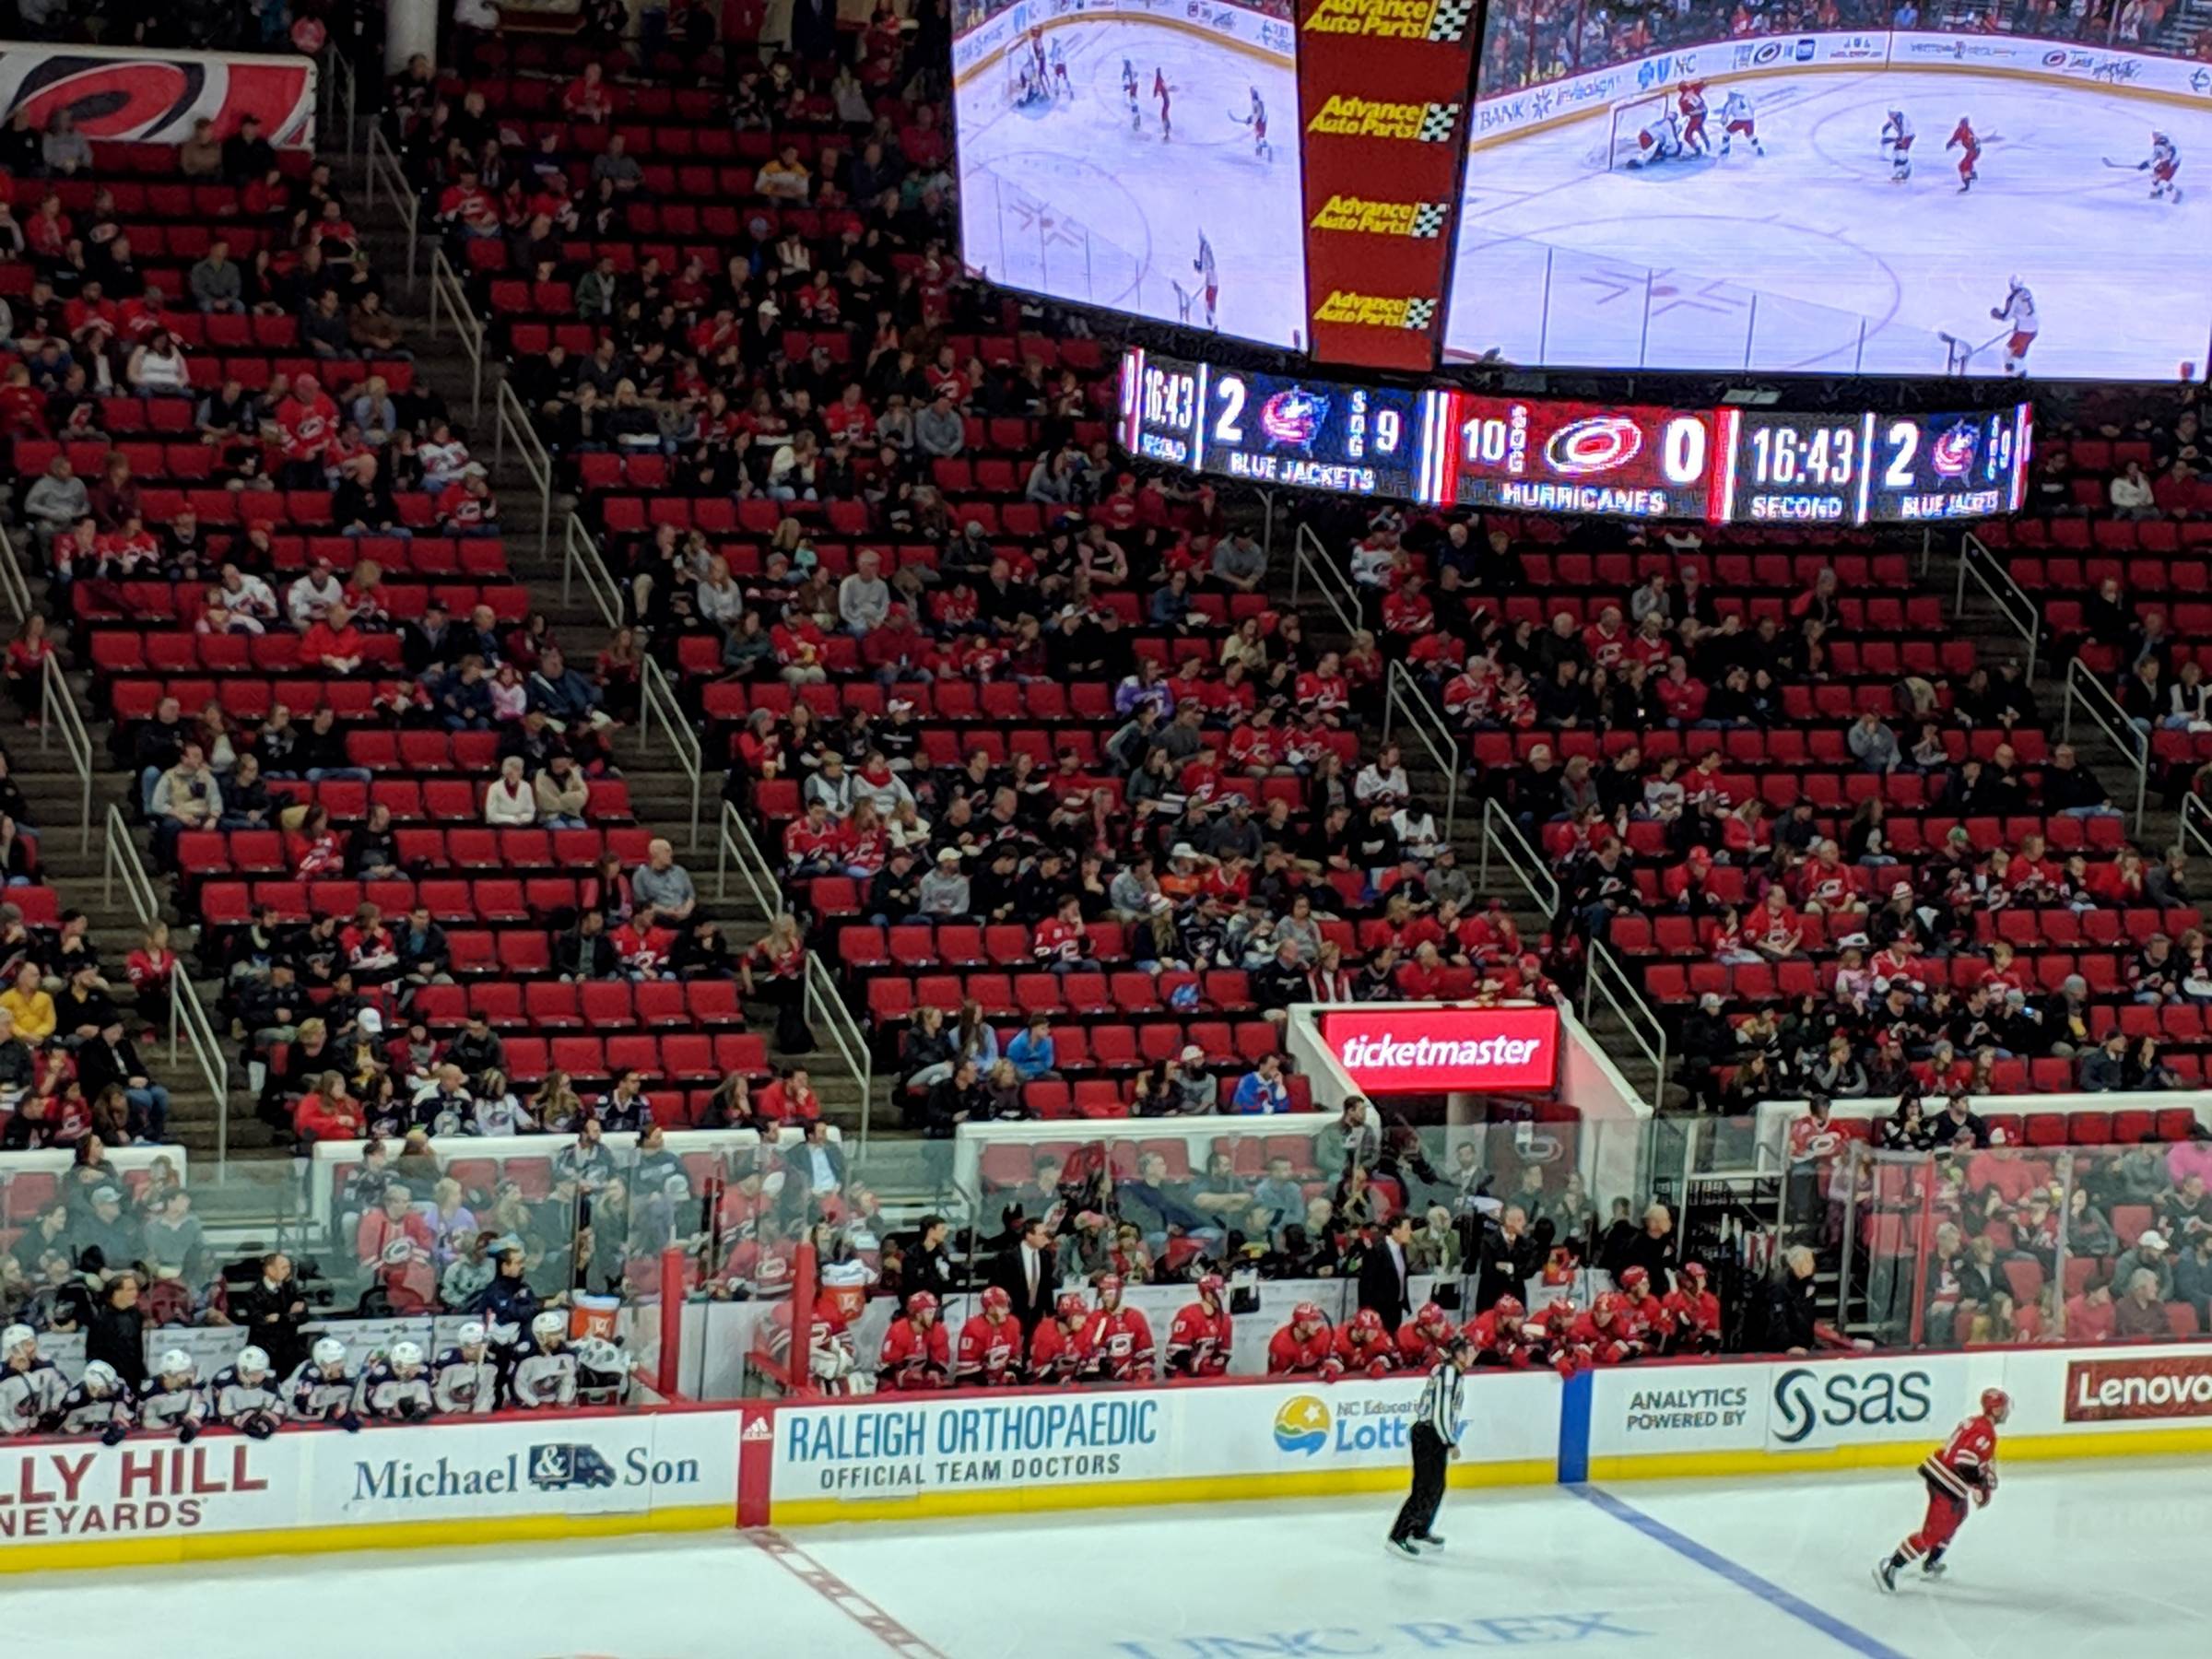 Section 106 at PNC Arena 